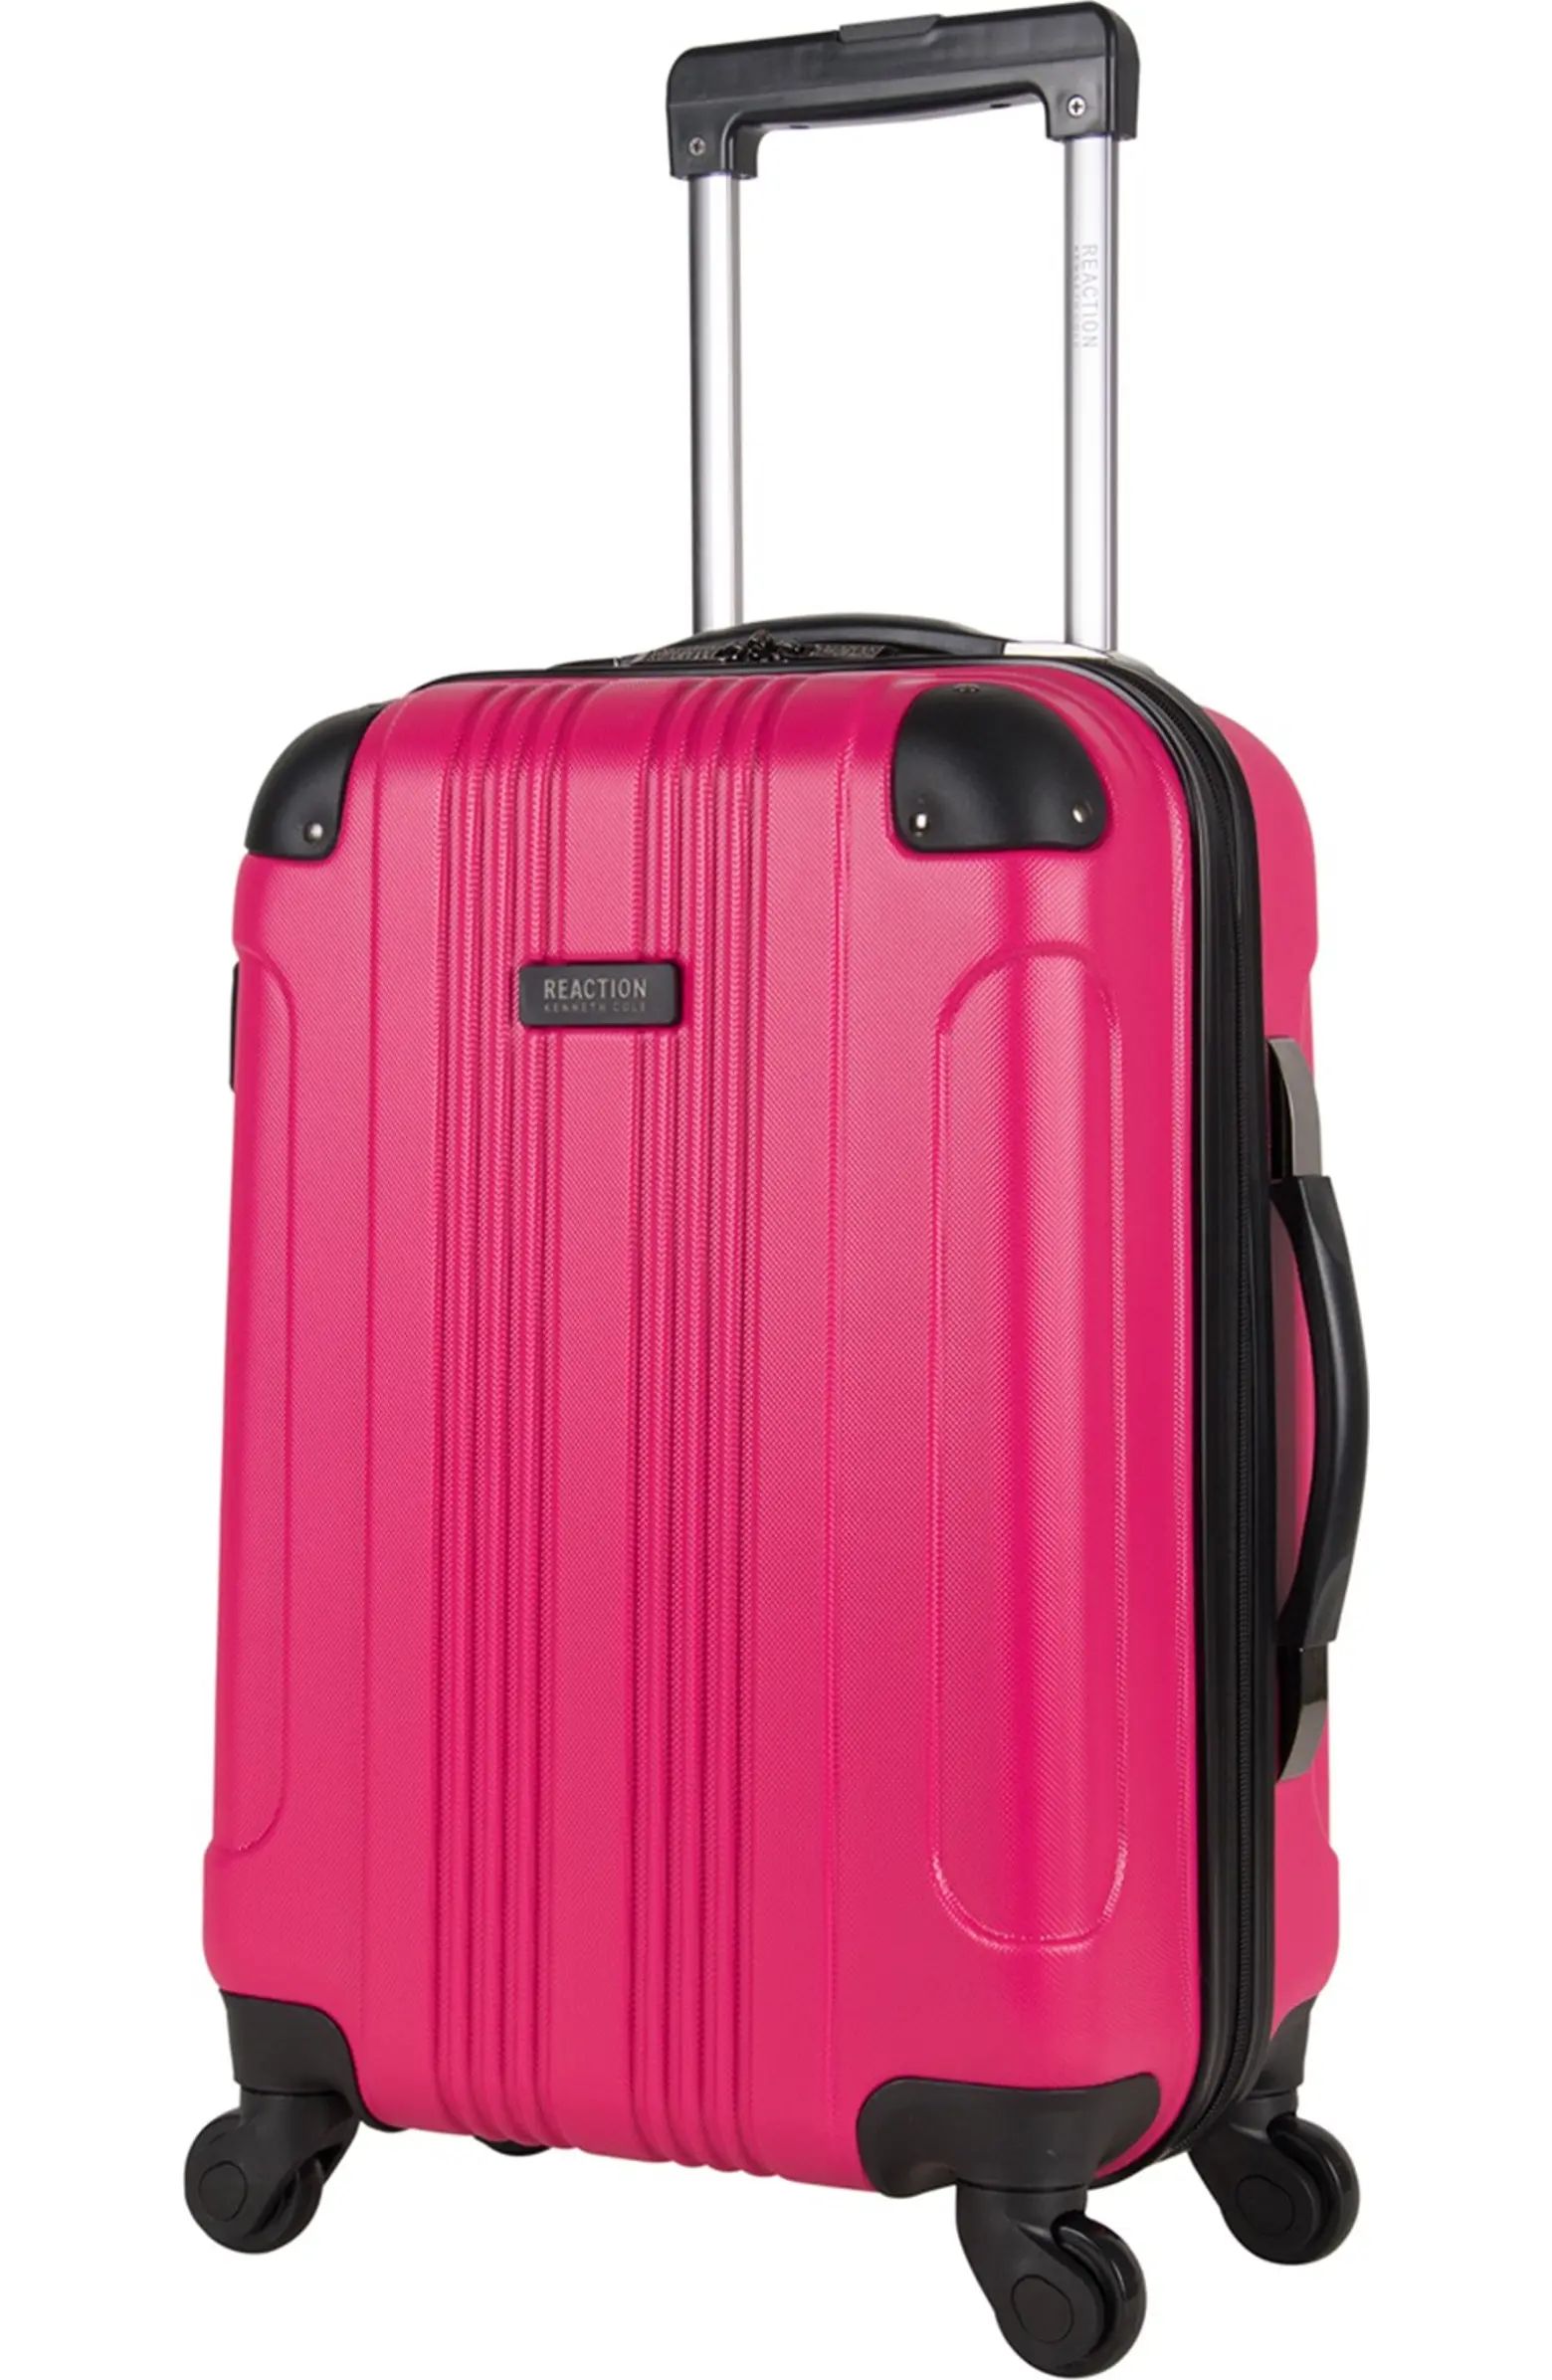 Out of Bounds 20" Lightweight Hardside 4-Wheel Spinner Carry-On Luggage | Nordstrom Rack